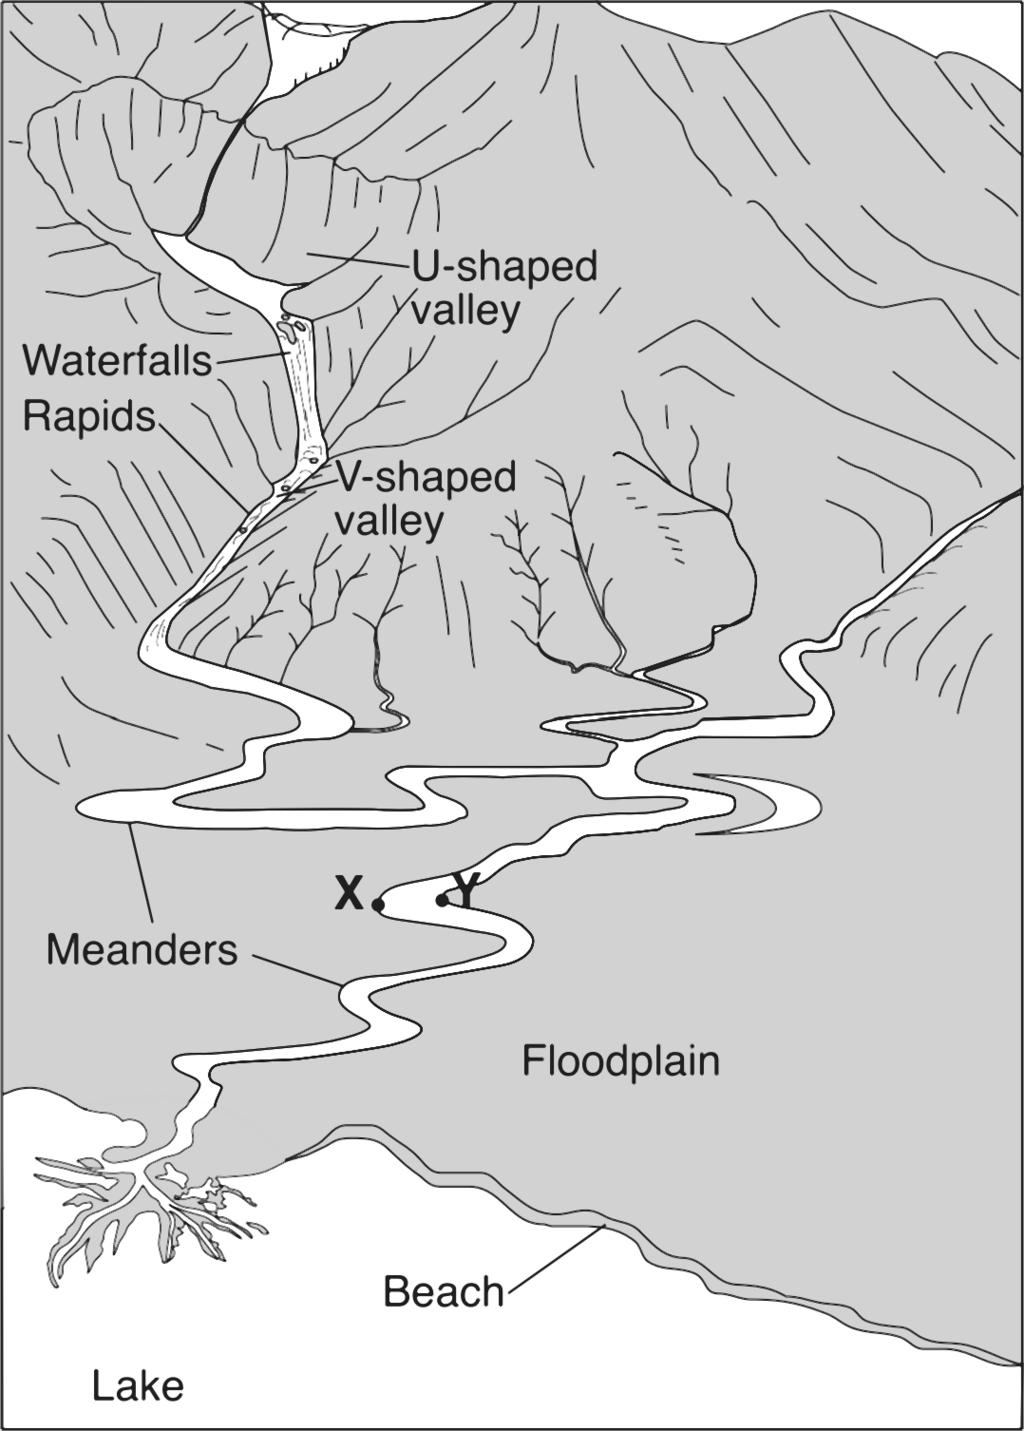 Explain why the upper valley in the mountains is U-shaped and the lower valley is V-shaped. This sand dune was most likely formed by A. water flowing from the left B. water flowing from the right C.